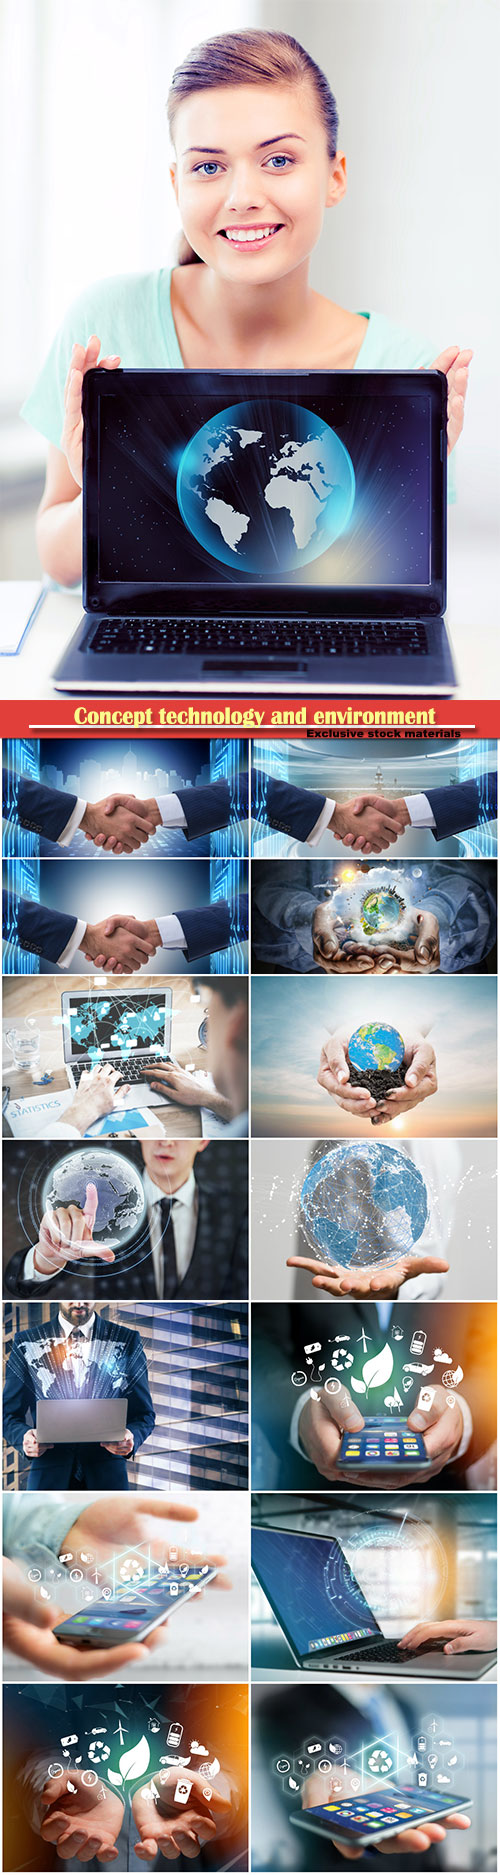 Concept technology and environment, network concept